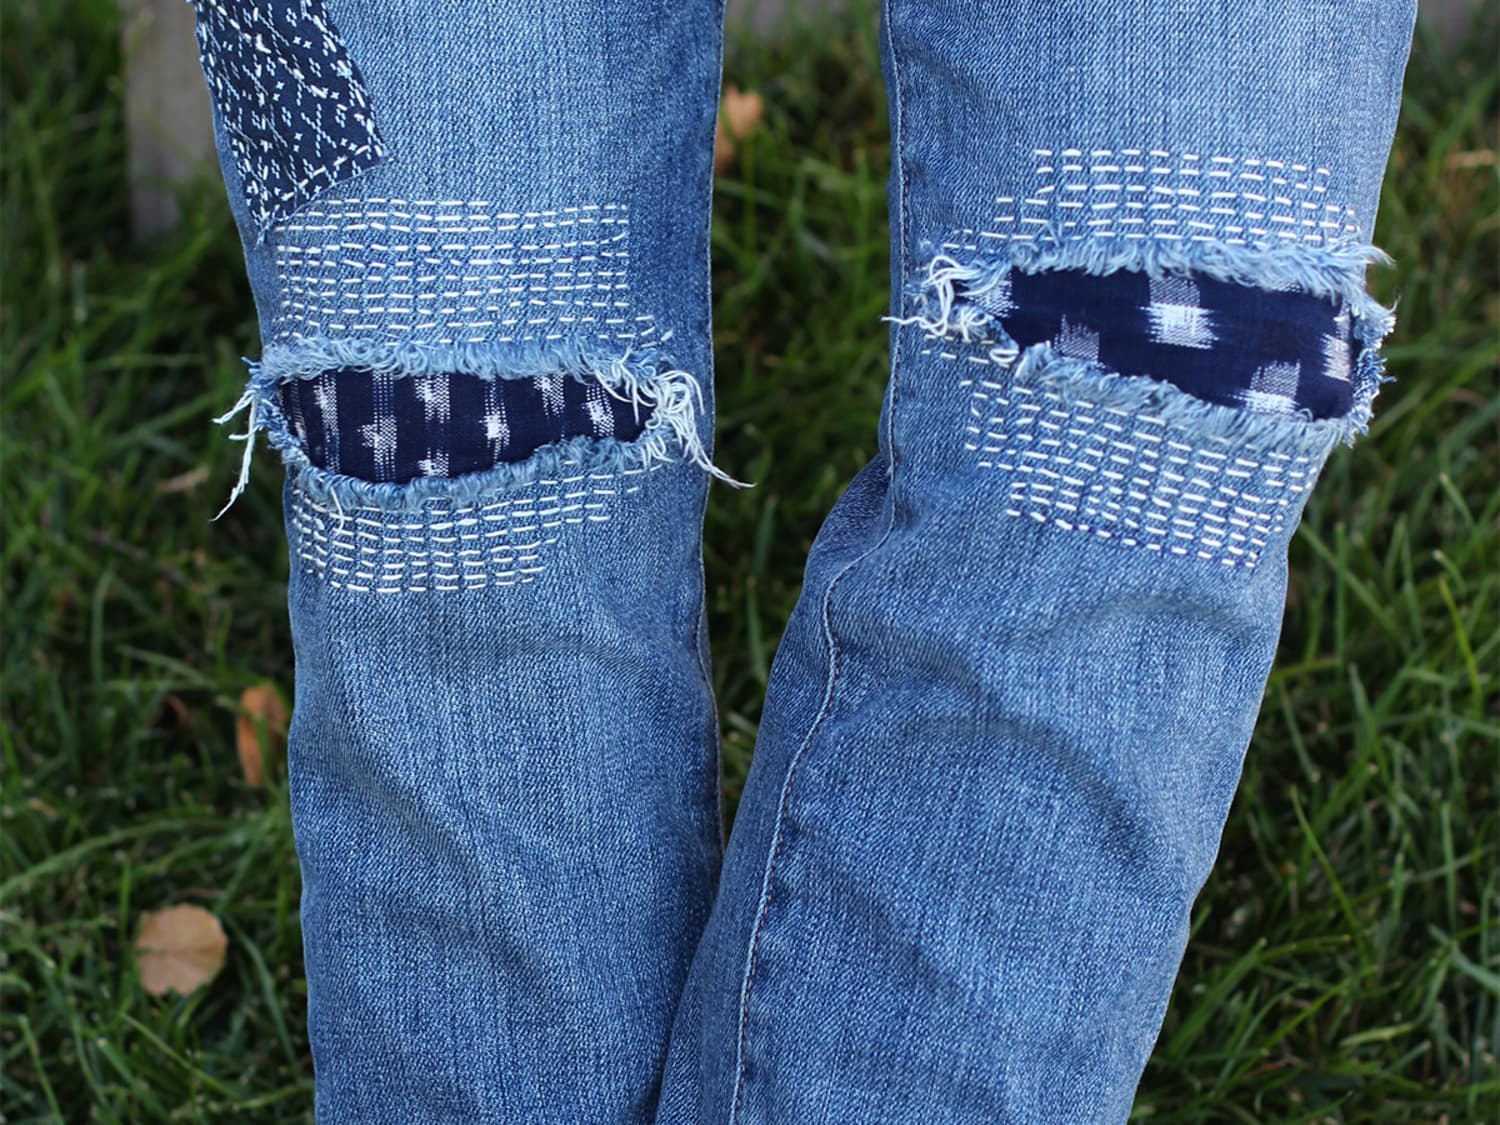 Patch a hole in jeans - Easy hand sewing tutorial - Repair holes in jeans  and clothing with patches 